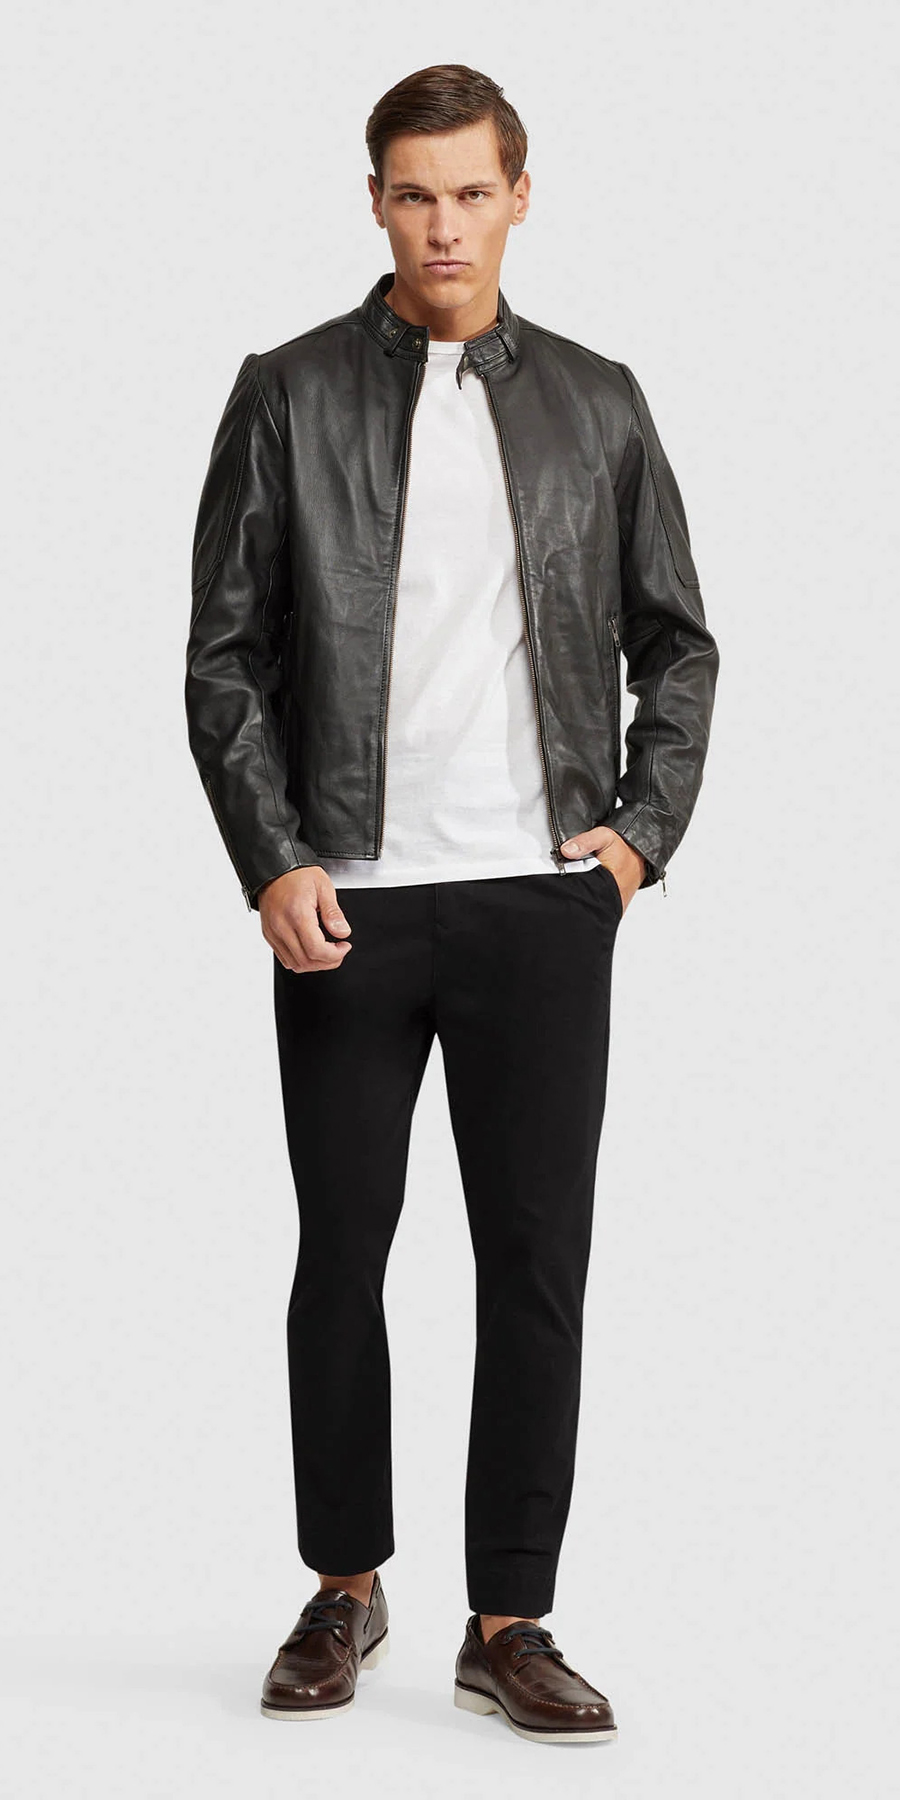 Black leather jacket, white t-shirt, black jeans, and brown shoes outfit